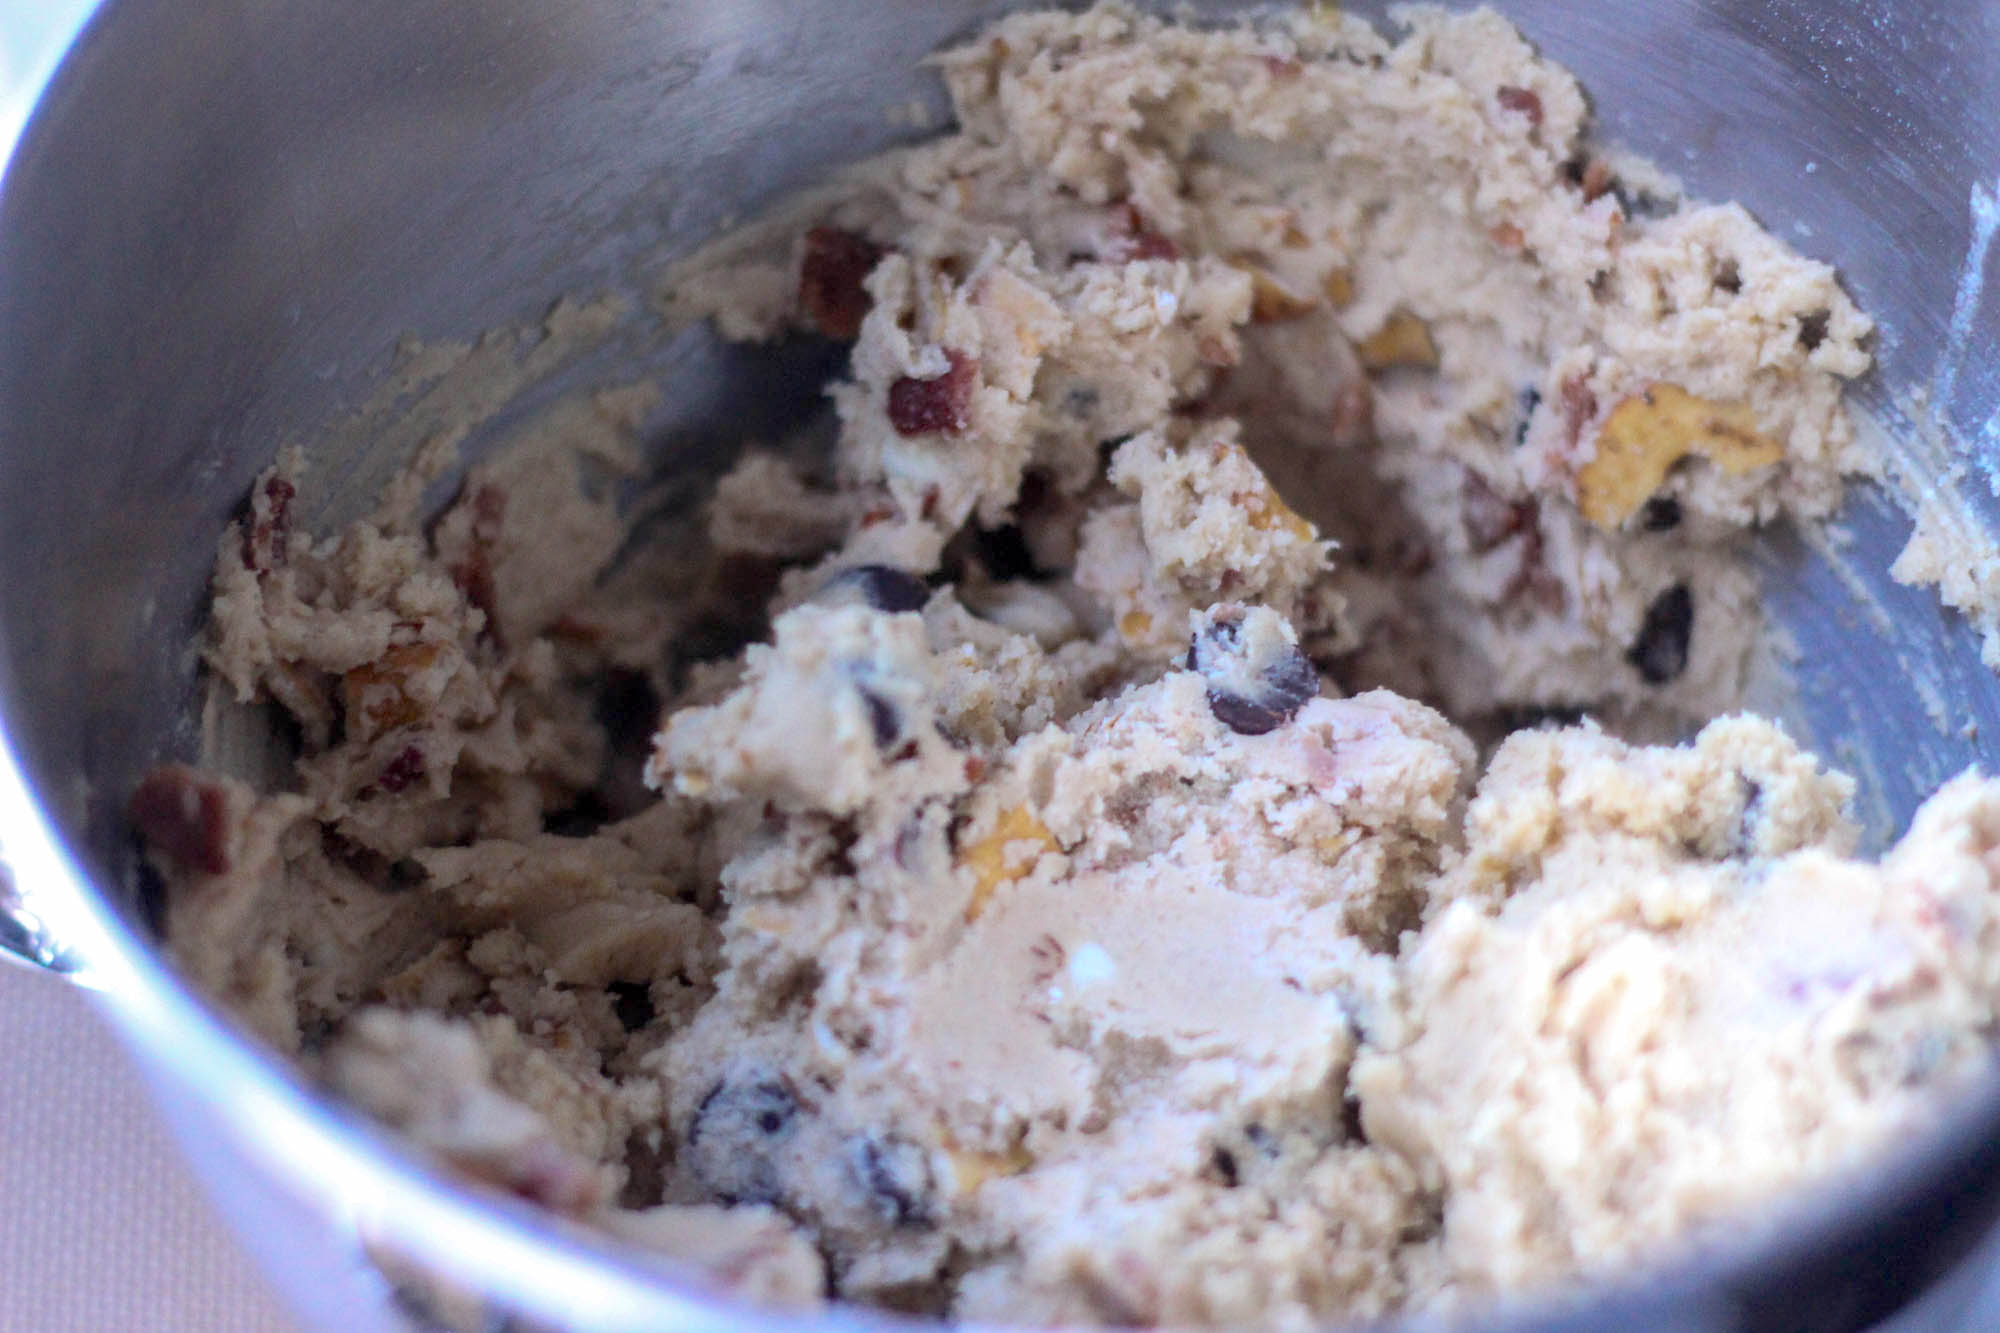 Adding the butter mixture to the dry ingredients